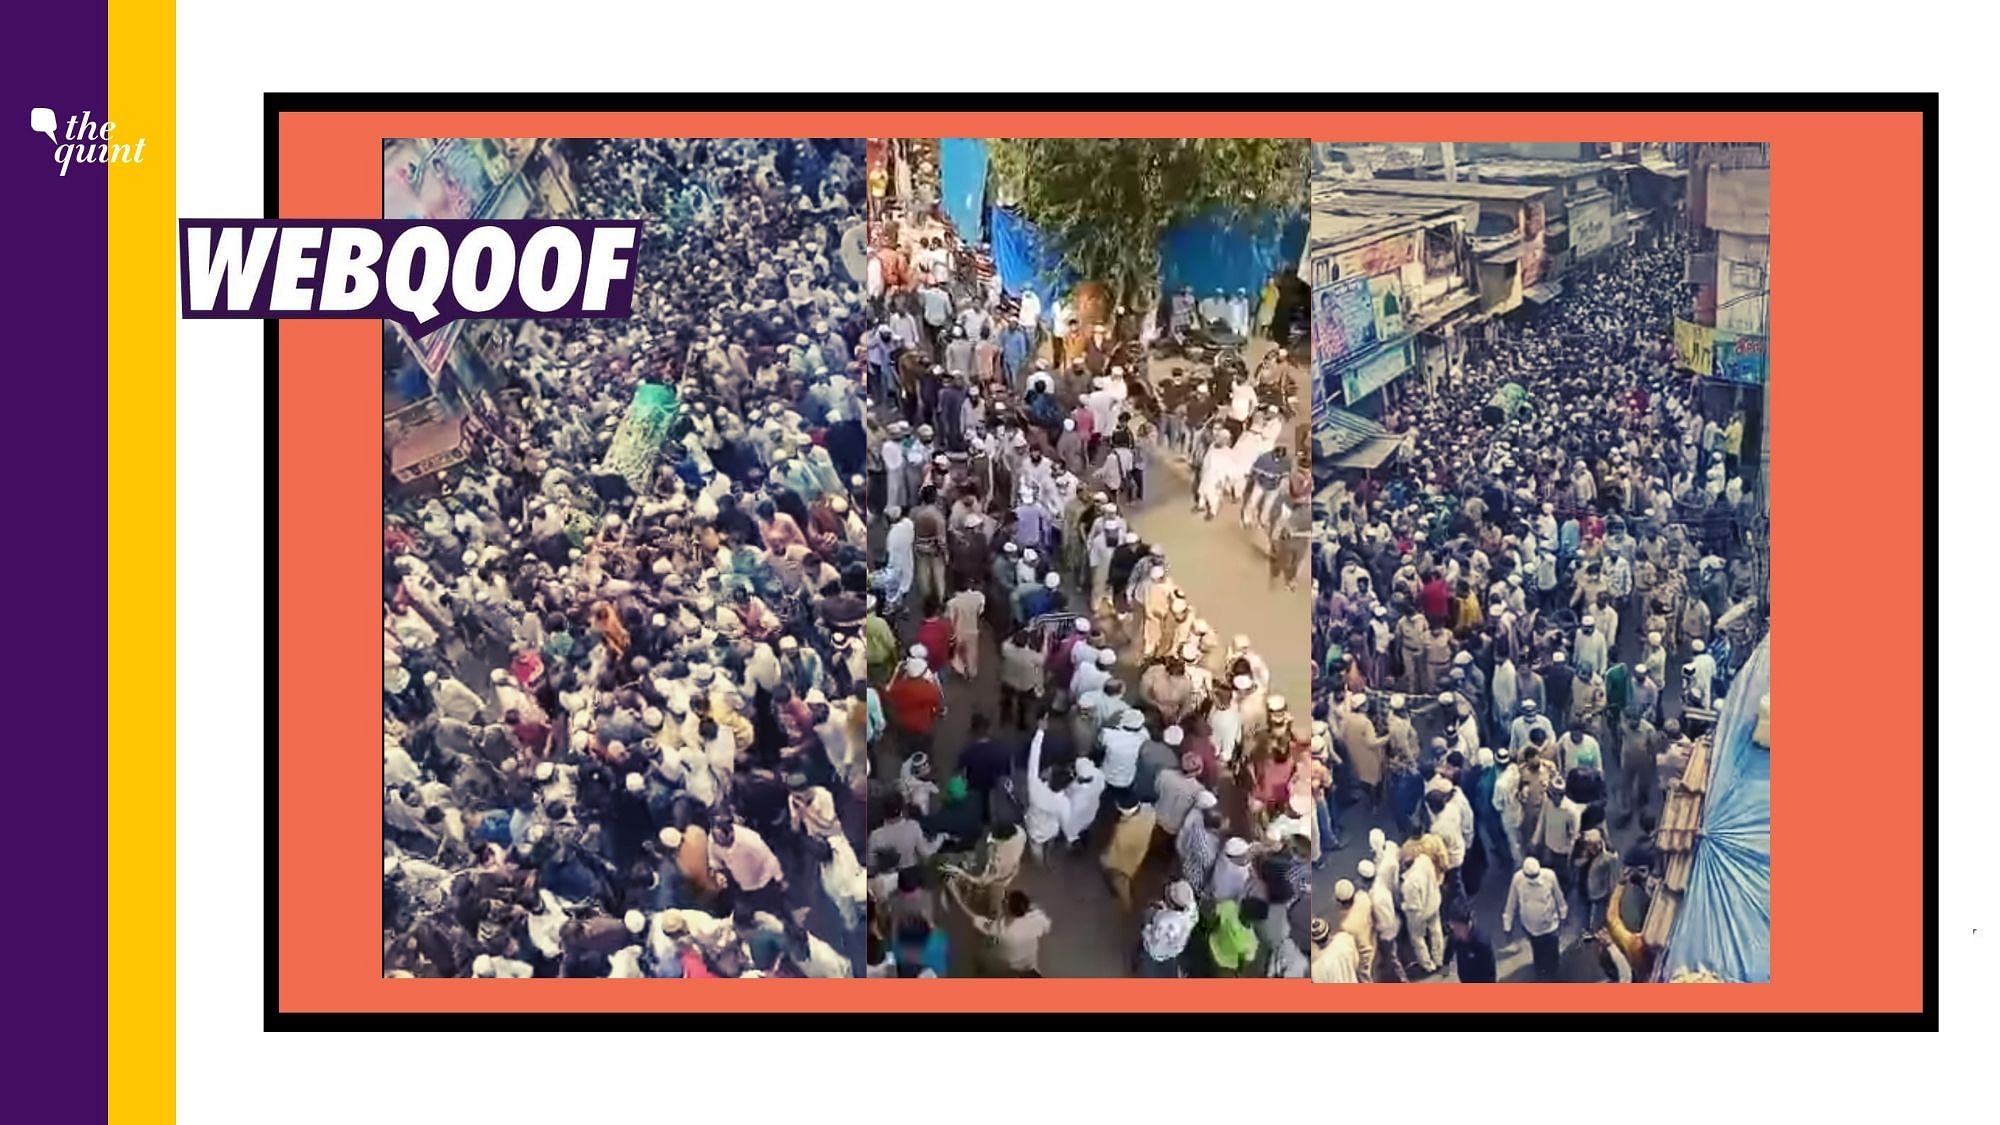 Video of funeral procession of a MNS leader was used to falsely claim that it shows how huge amount of people crowded at Ahmed Patel’s funeral.